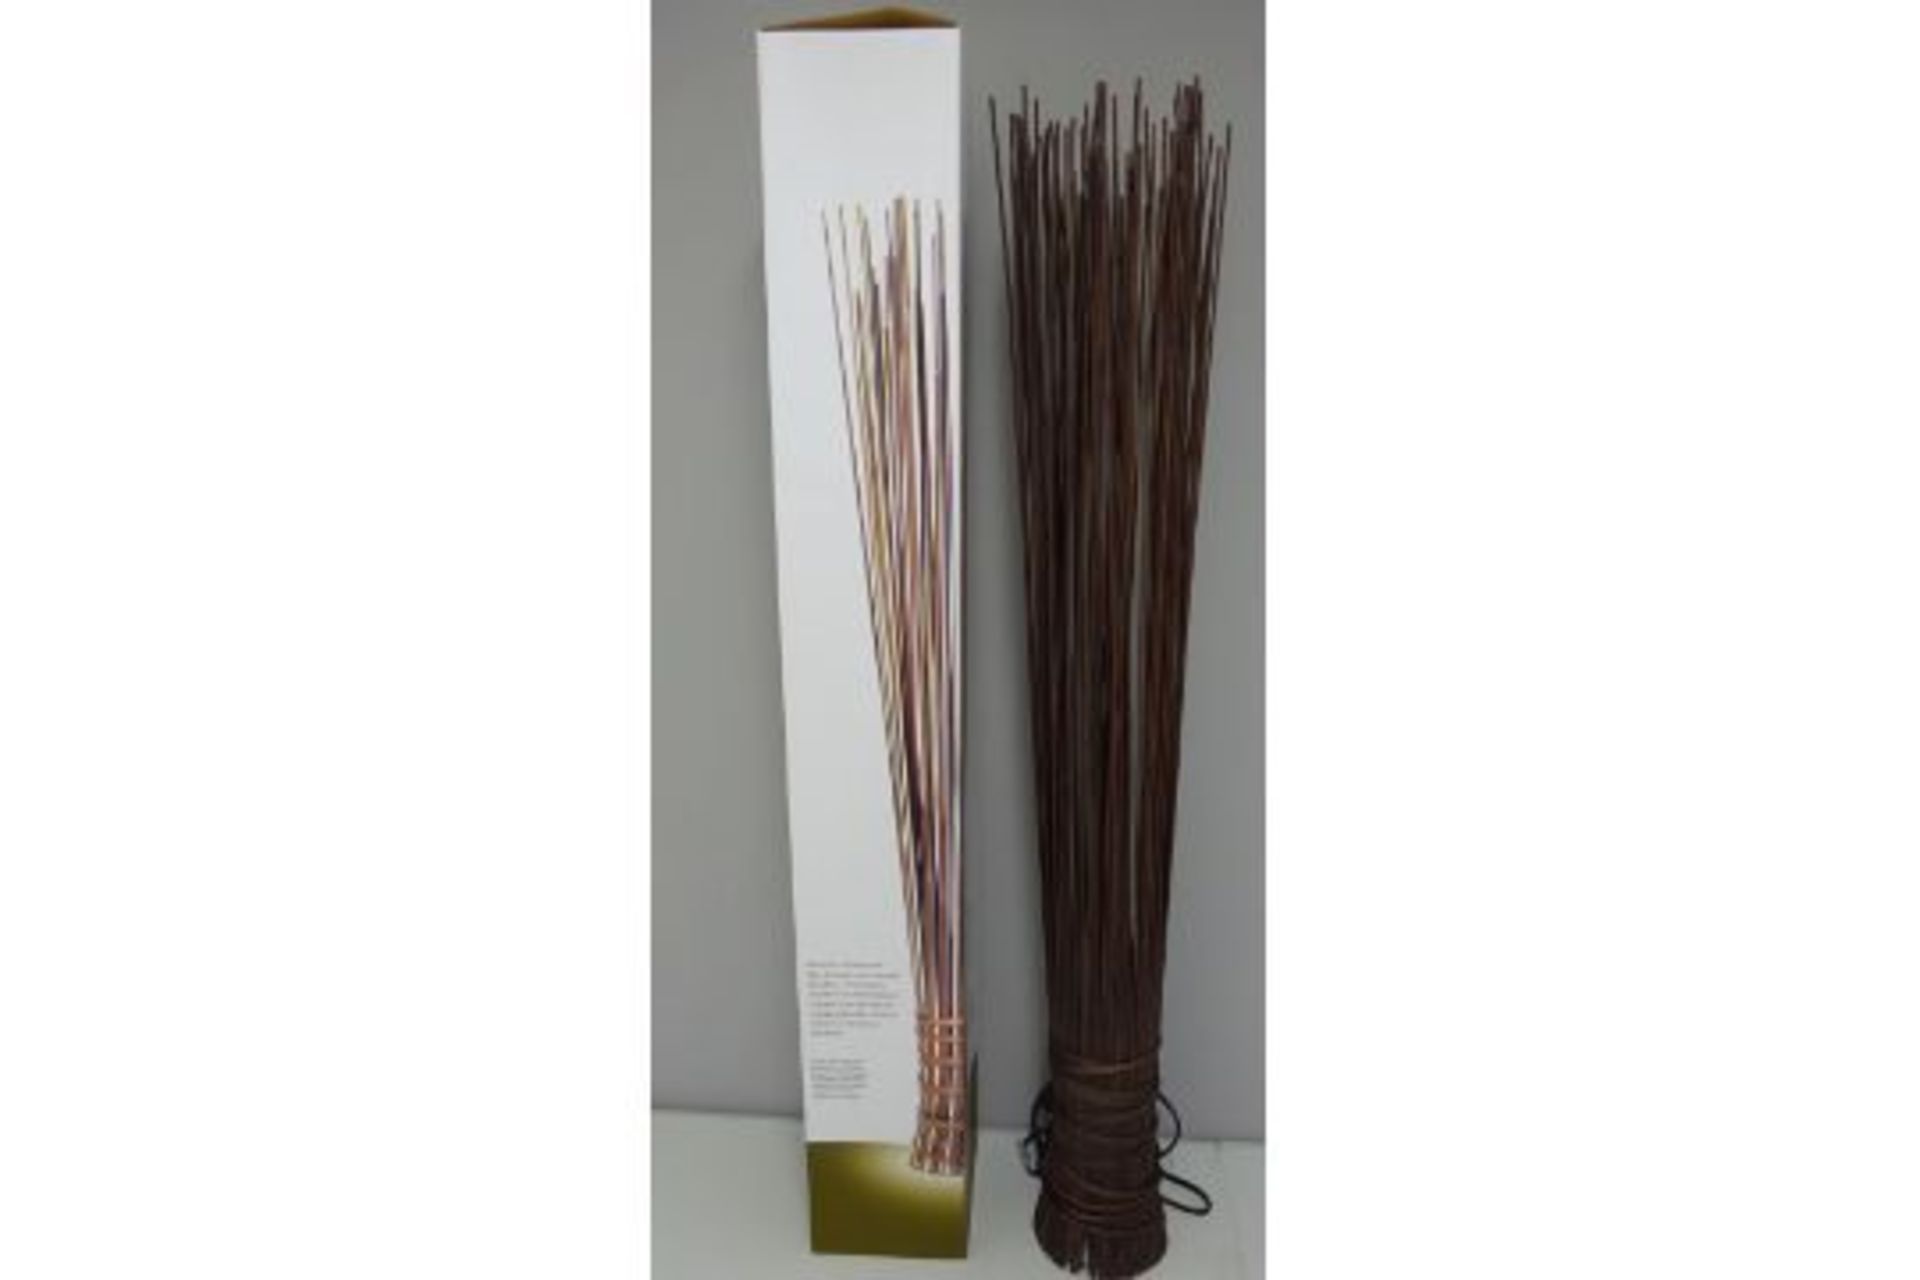 NEW BROWN BAMBOO INDOOR LIGHT 100CM TALL - RRP £29.99.